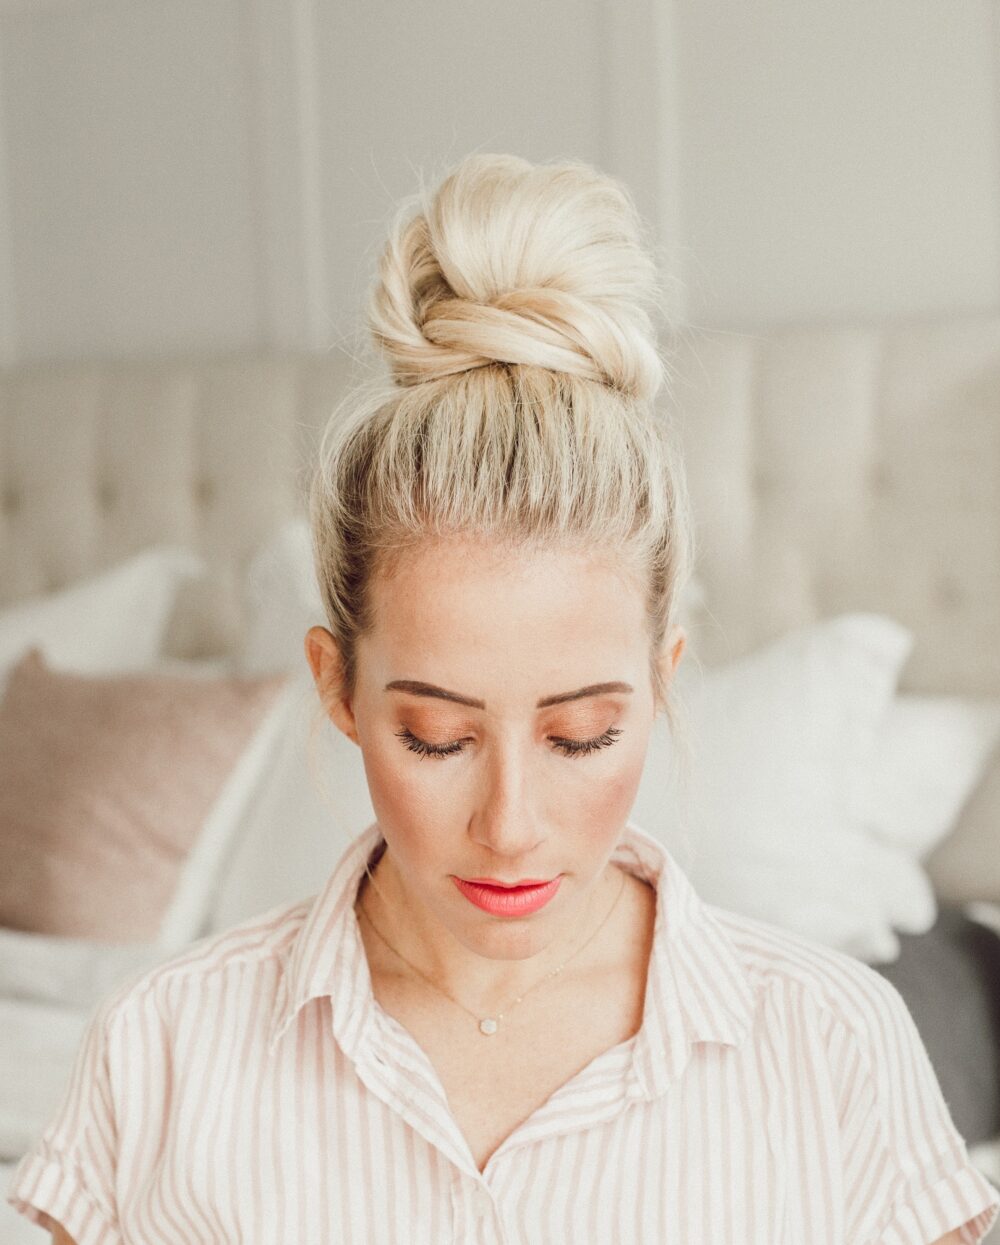 Easy Messy Bun, Updo Hairstyles | Hairstyles For Girls - Princess Hairstyles